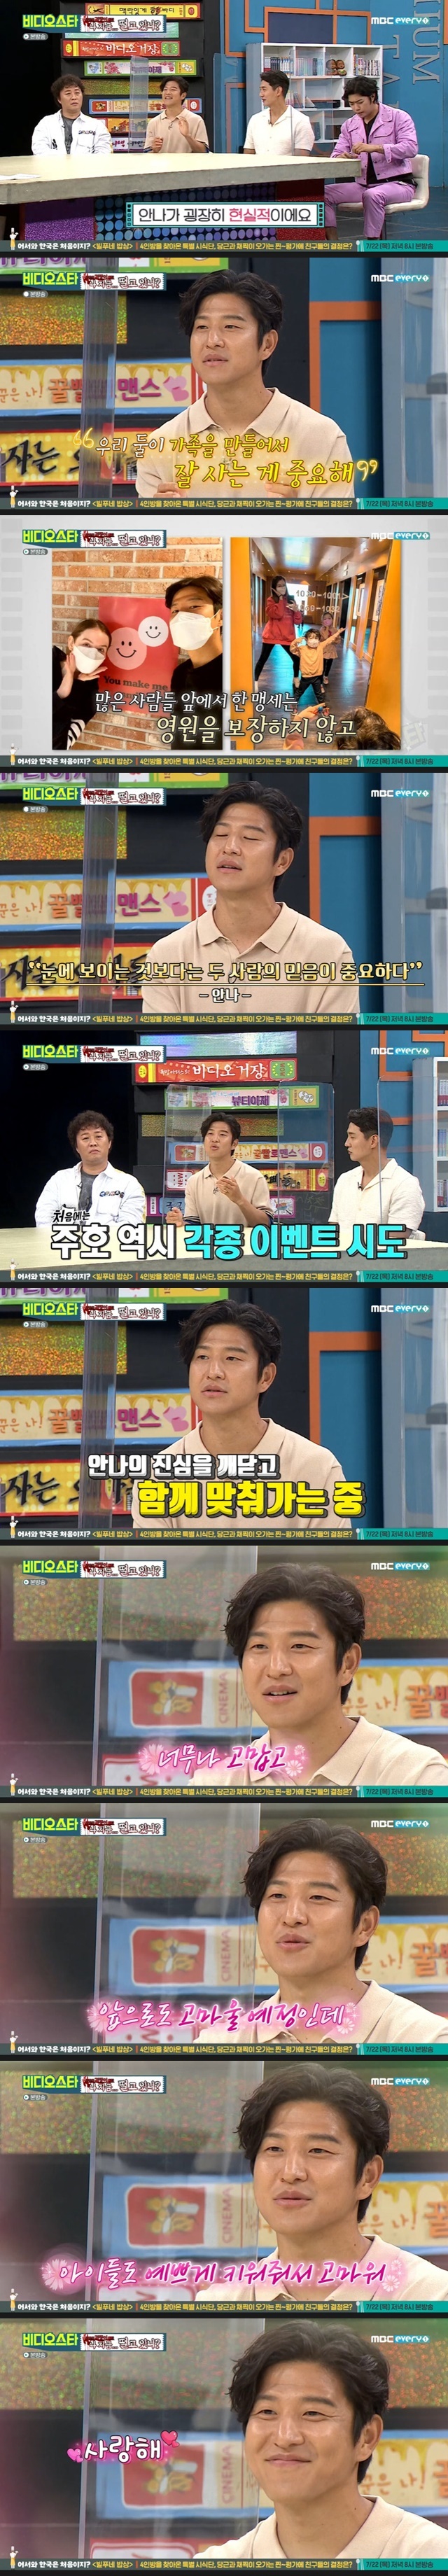 Park Joo-ho told wife Anna why she didnt proposeOn MBC Everlons Video Star, which was broadcast on July 20, an unexpected cowardly feature, Im shaking now?, Jung Jun-ha, Park Joo-ho, Choi Hyeon Ho, and Seo Tae-hoon appeared.Park Joo-ho said, When an athlete goes to the training camp, there is a hotel in the mountain and a restaurant.I came to work out, said Park, who was more popular than himself, and Park said, We did not have any children today. You must bring them in next time, Park Joo-ho said.Park Joo-ho said, I sleep with my child, but Anna let me put her separately when she is five months old.Na-eun is beginning to cry, so I am sick. Anna said that we should rest and adjust if we want to see Na-eun tomorrow.I dont cry after a week, he said. After I get here, I sleep separately.Park Joo-ho is content to do as his wife Anna says, while Choi Hyeon Ho says, I did it myself, but I got through it.So I am still sleeping together, he said. I regret it. Park Joo-ho said, I have a lot of energy when I look at the athletes. Especially the youngest.I think that Father is a soccer player and will show interest in soccer. If you take a walker and pack a moving object as well as a walker, you will be trying to carry it.Im going to put everything on the couch, like chairs or something. I guessed that the youngest Qiao Zhenyu might be an athlete.Choi Hyeon Ho said, Do you want to make a handball?I recommend a handball to Qiao Zhenyu, and Park Joo-ho showed a hesitant look and laughed as he said, I am going to tell you if the child is good.Park Joo-ho, who is so loved by the public as a father of three children, still did not propose to his wife Anna, who had three children and raised them.Park Joo-ho said, Anna is very realistic. She does not need a wedding. She has this idea.It is the best thing to live comfortably by making you and me and family. Park Joo-ho said, If you get married, youll get divorced, and if youre happy, youll get divorced, and its important to live happily to the end.At first, I tried to speak only, but now I am living in a good way because I am real. Kim Sook admired Anna mind is so cool. 